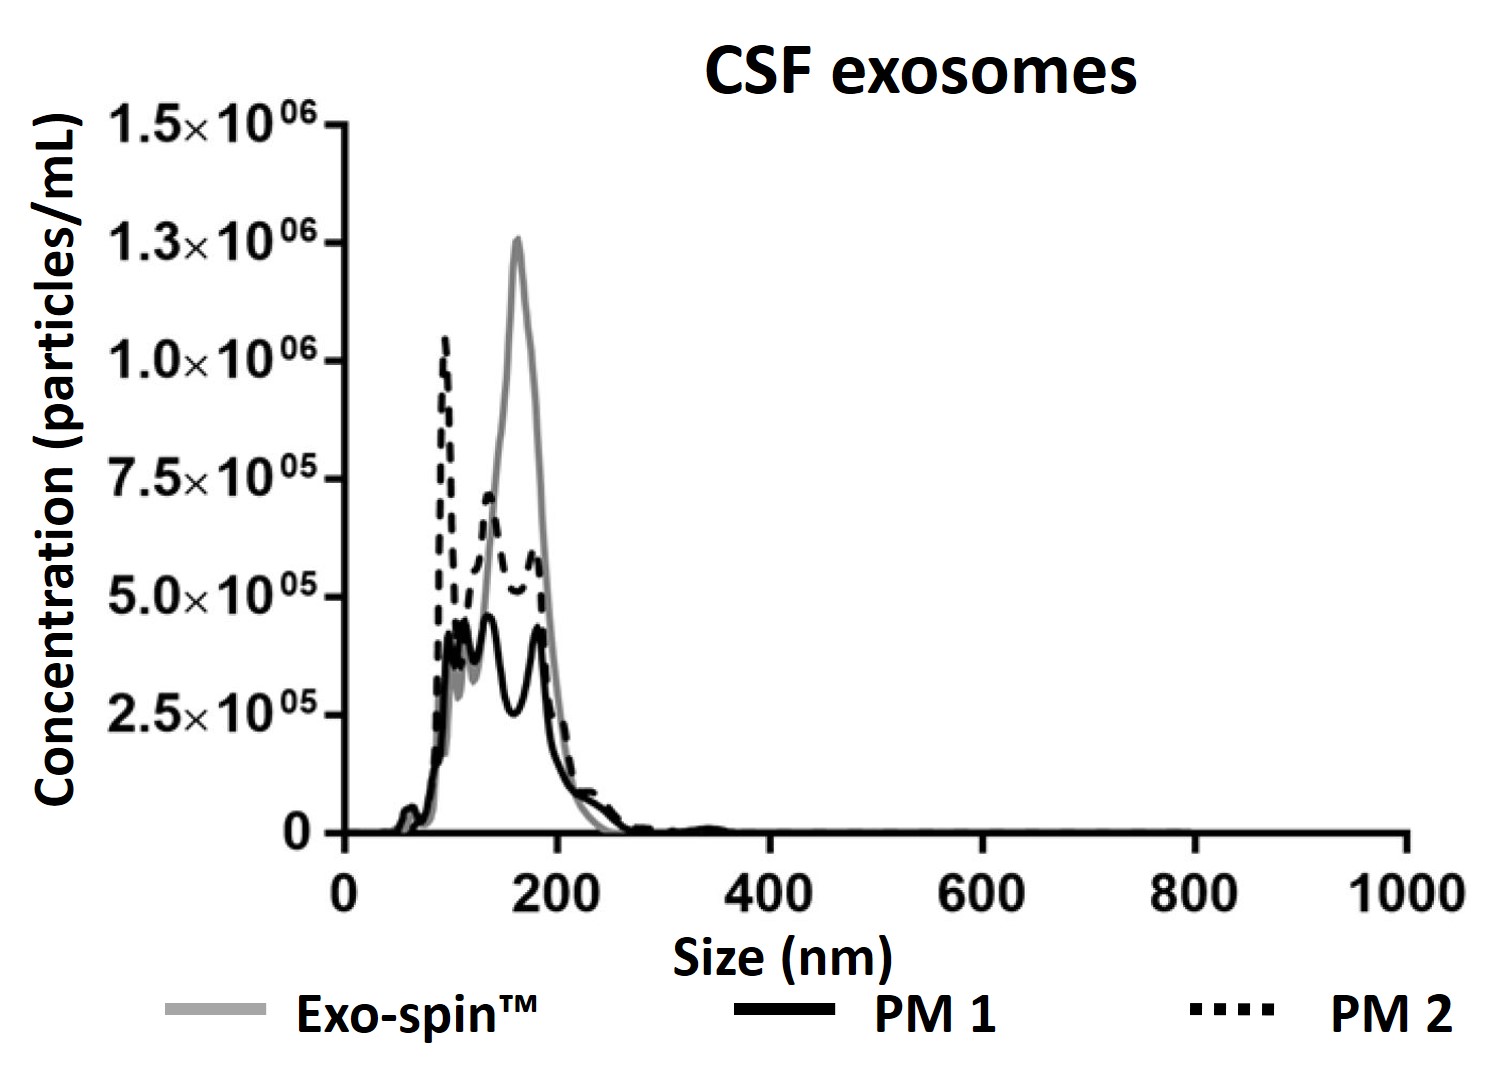 Exosomes from CSF